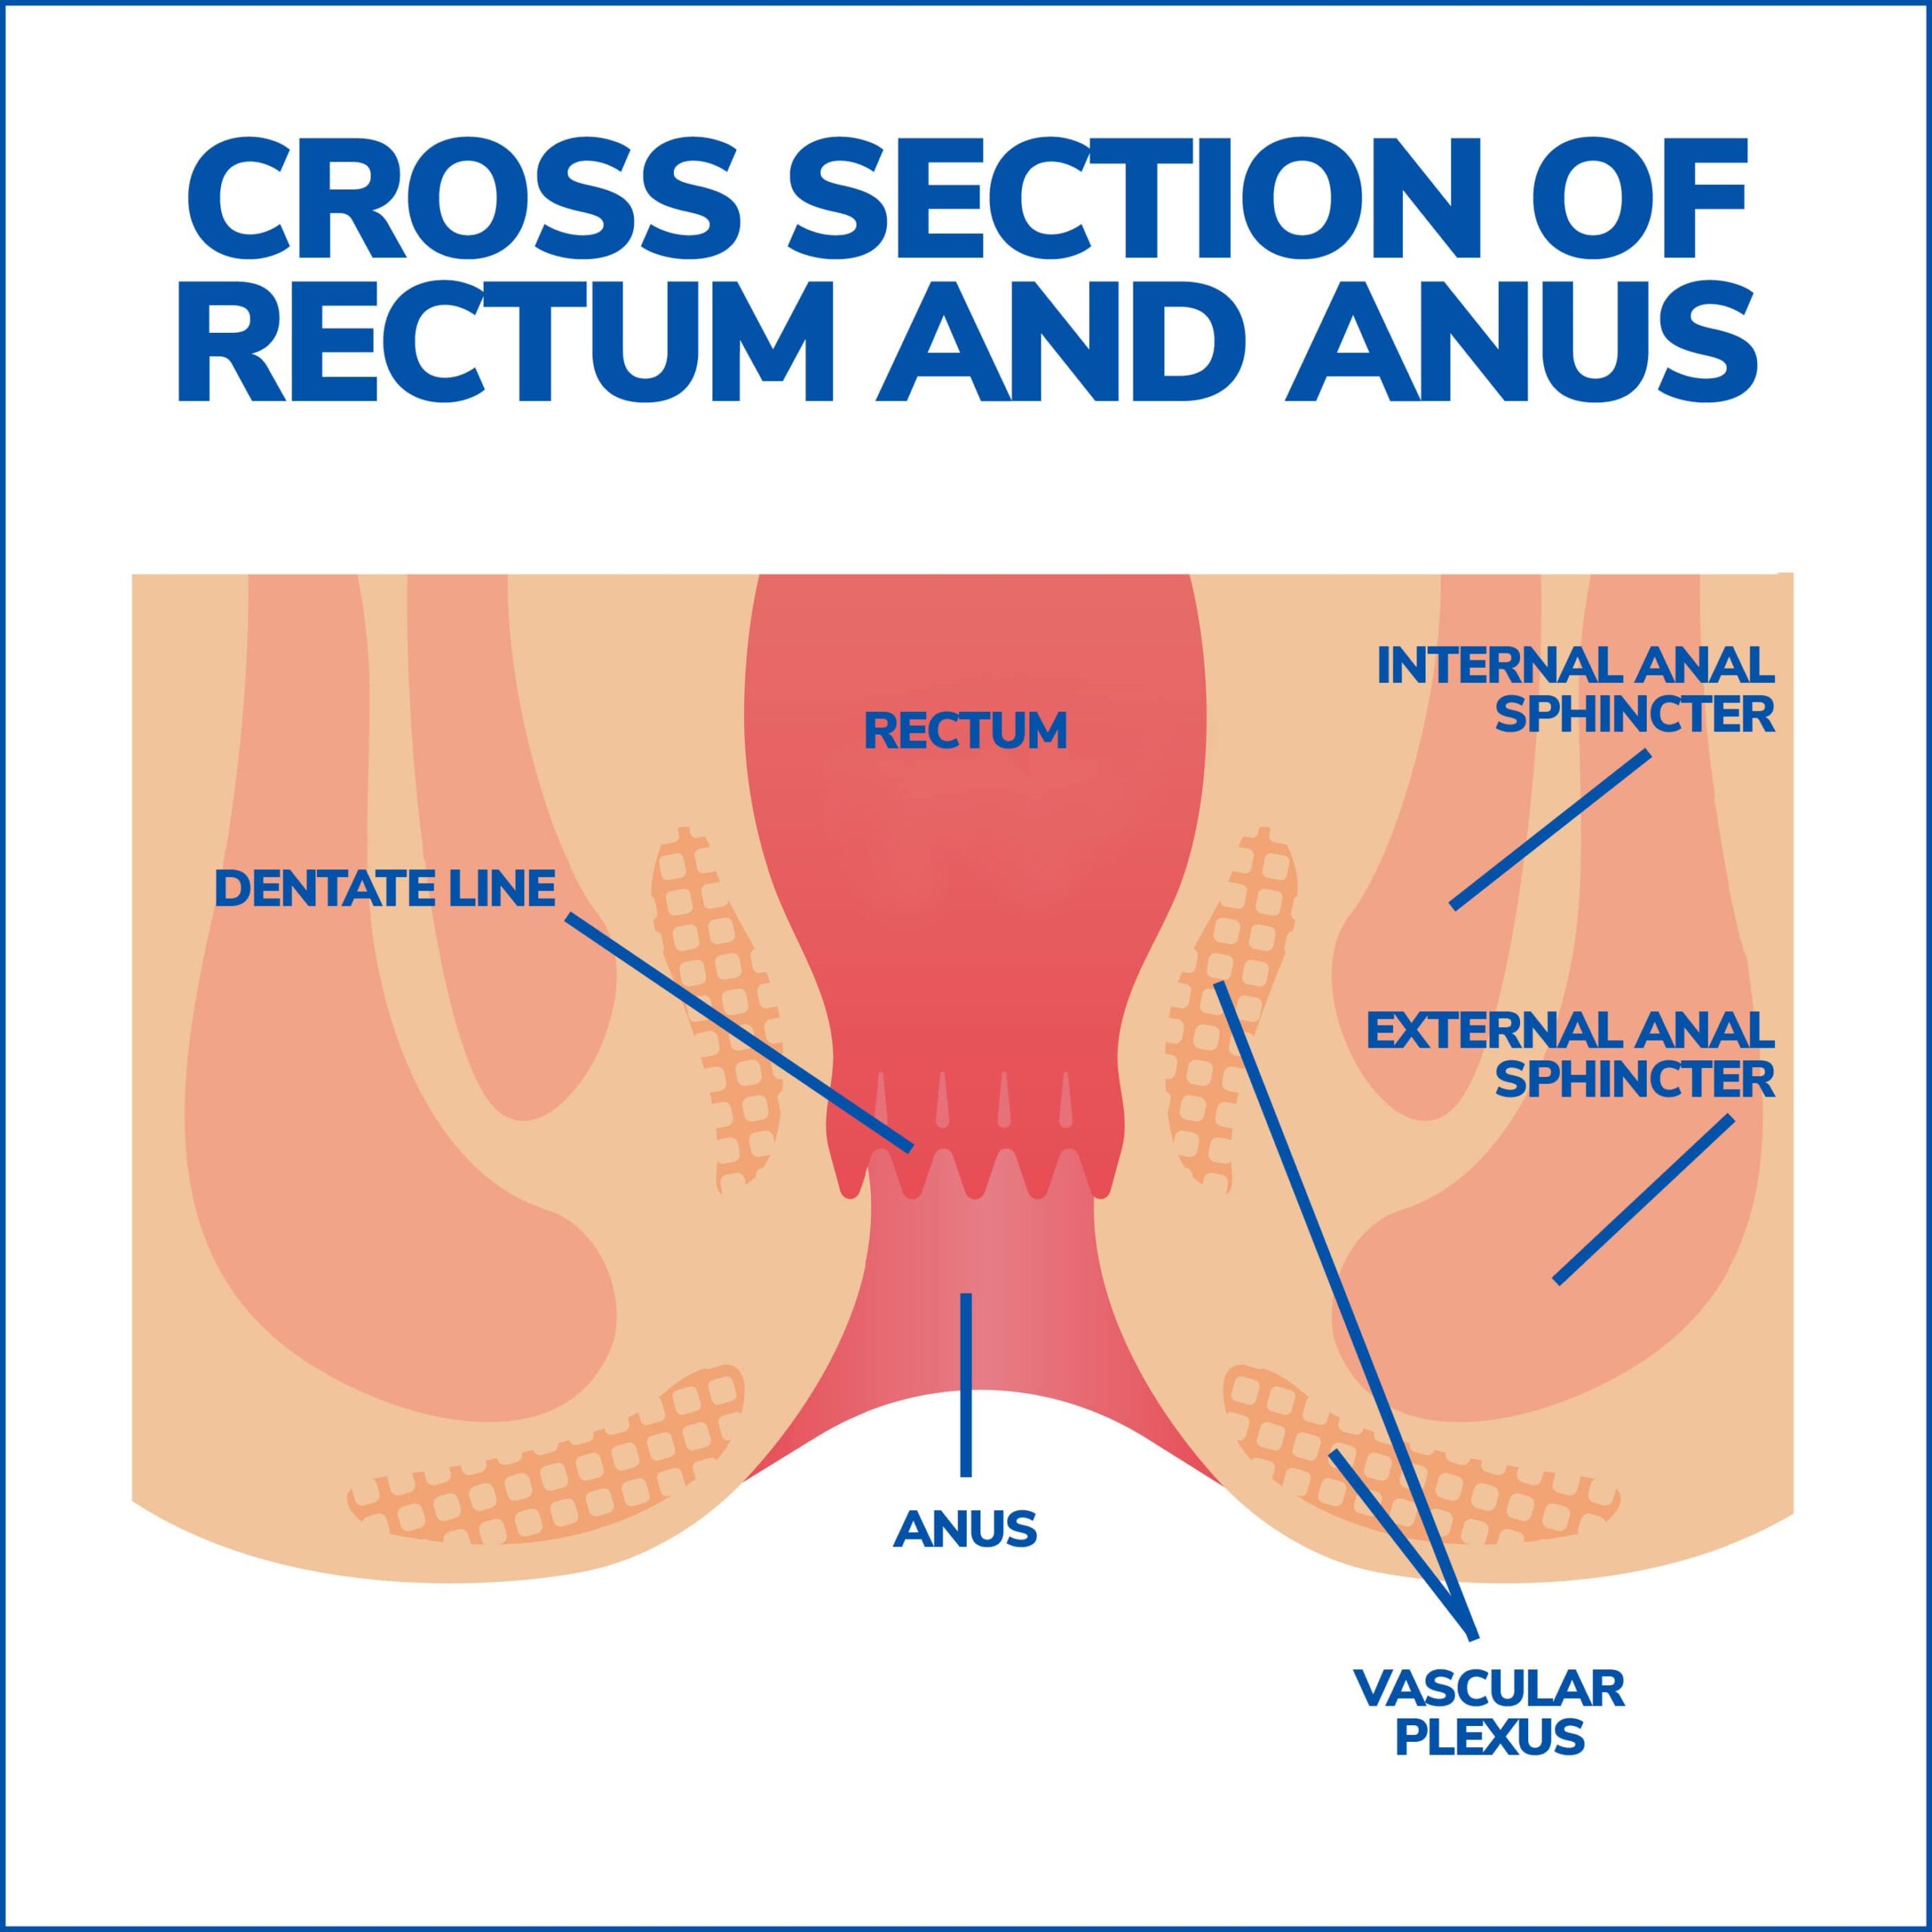 Cross Section of Rectum and Anus